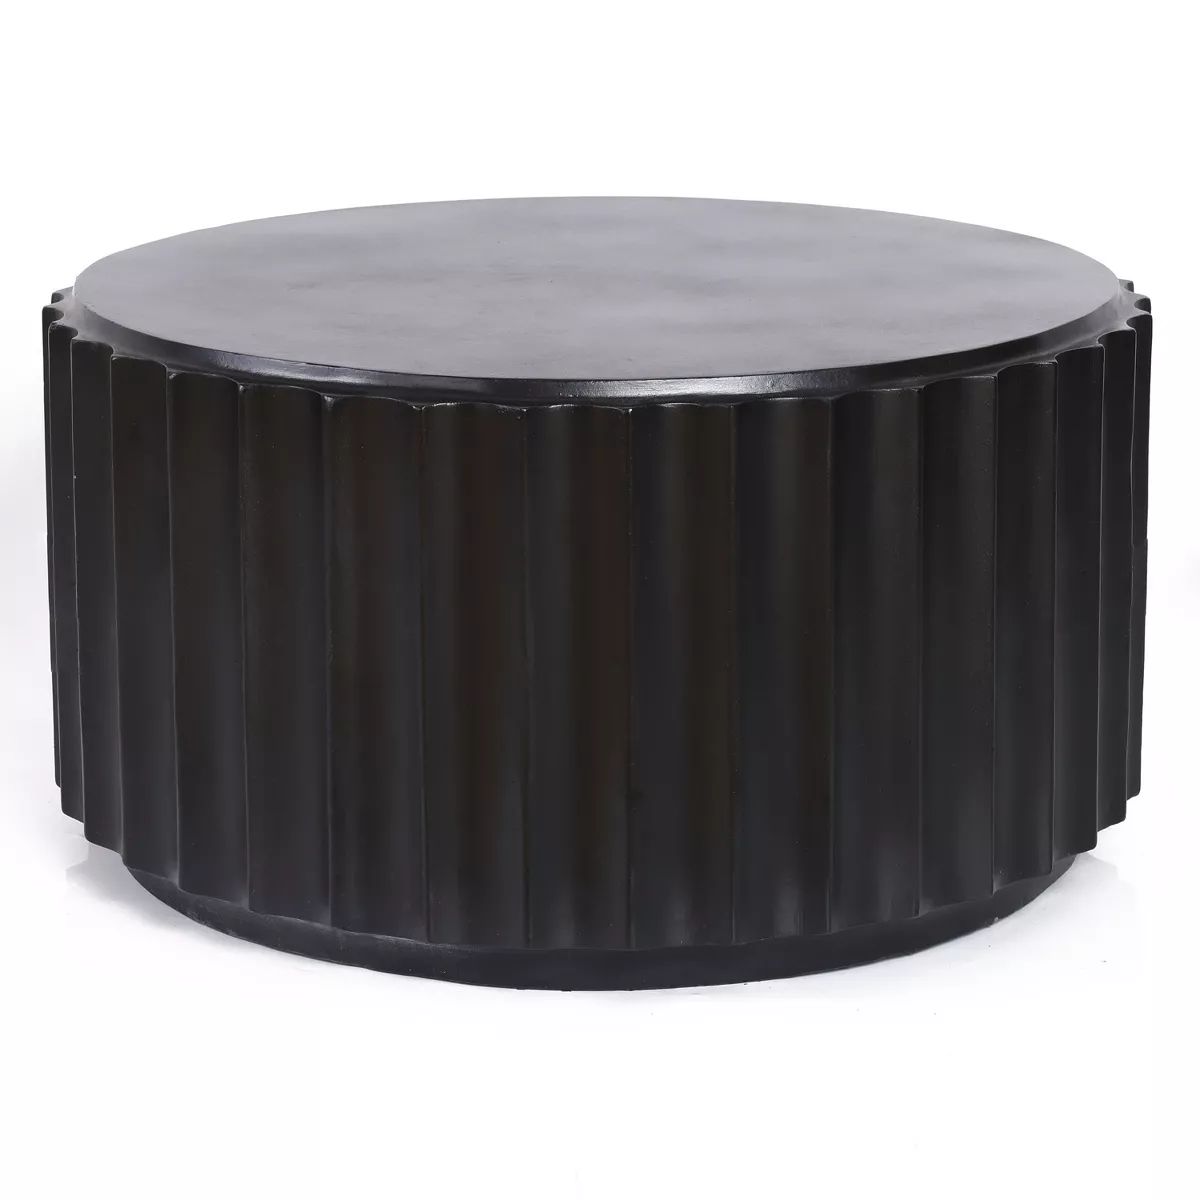 LuxenHome Black Cement Round Coffee Table | Target